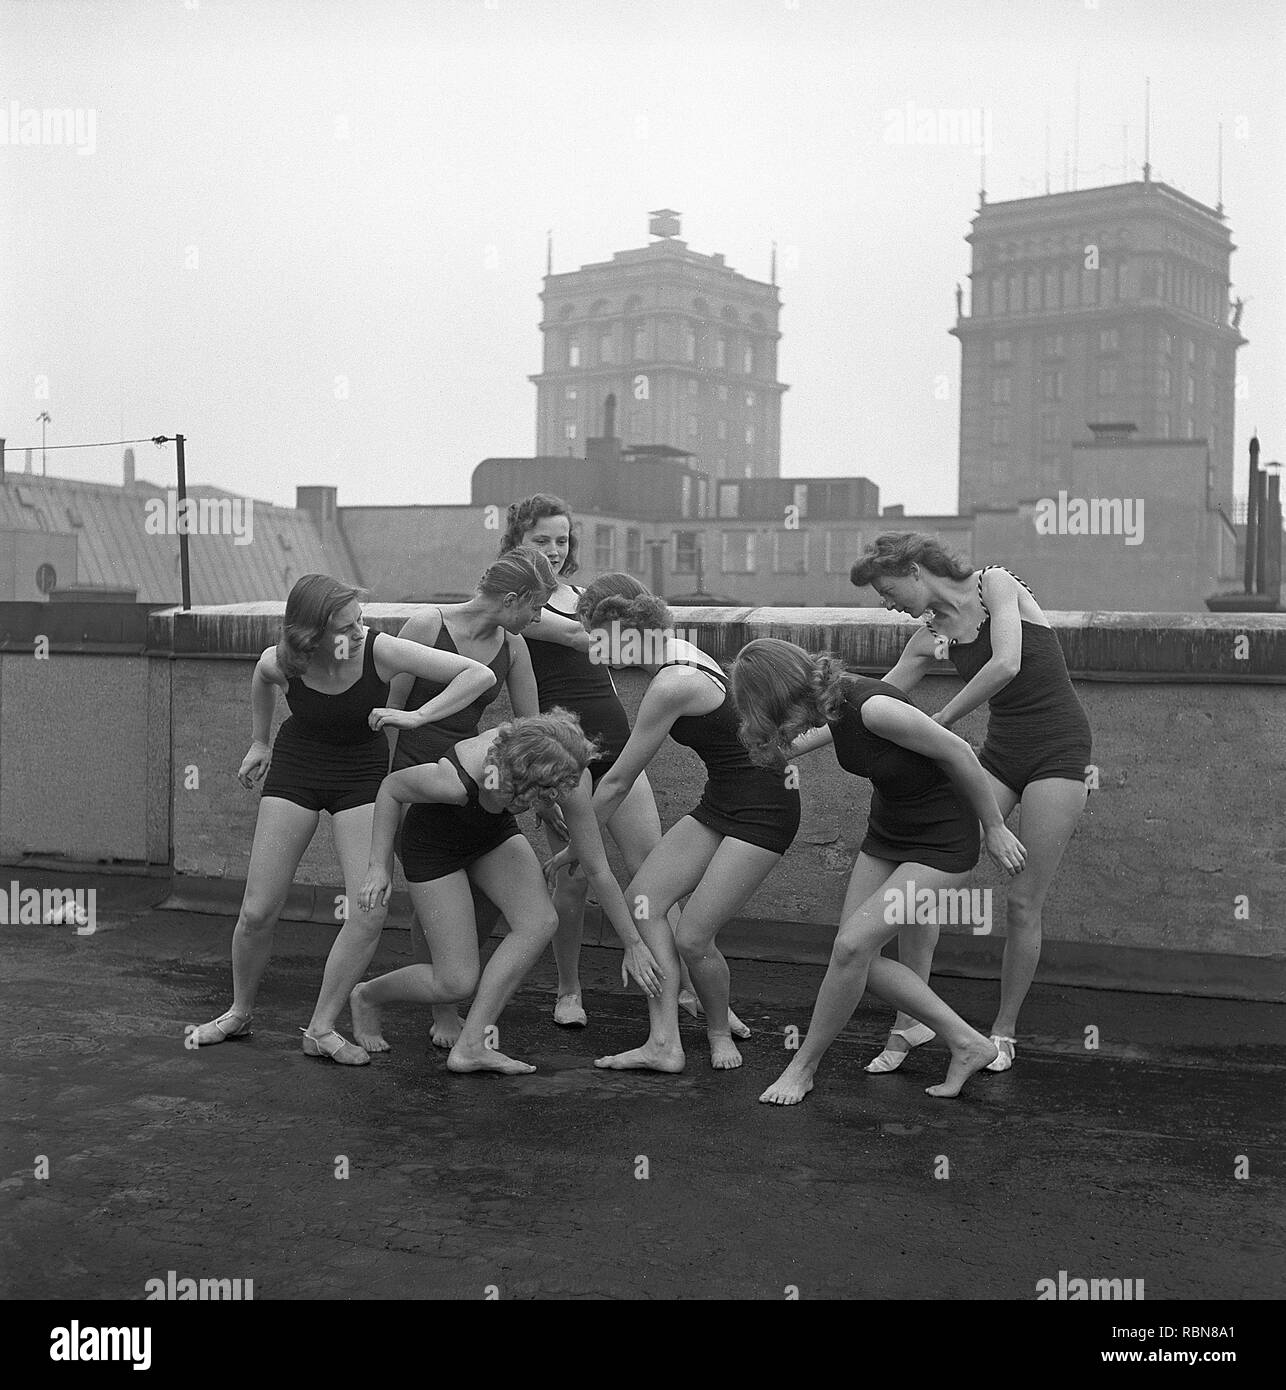 Gymnasts in the 1940s. A group of women gymnasts are training together on a top of a building.  Sweden  Photo Kristoffersson Ref O7-1-6. Sweden 1945 Stock Photo